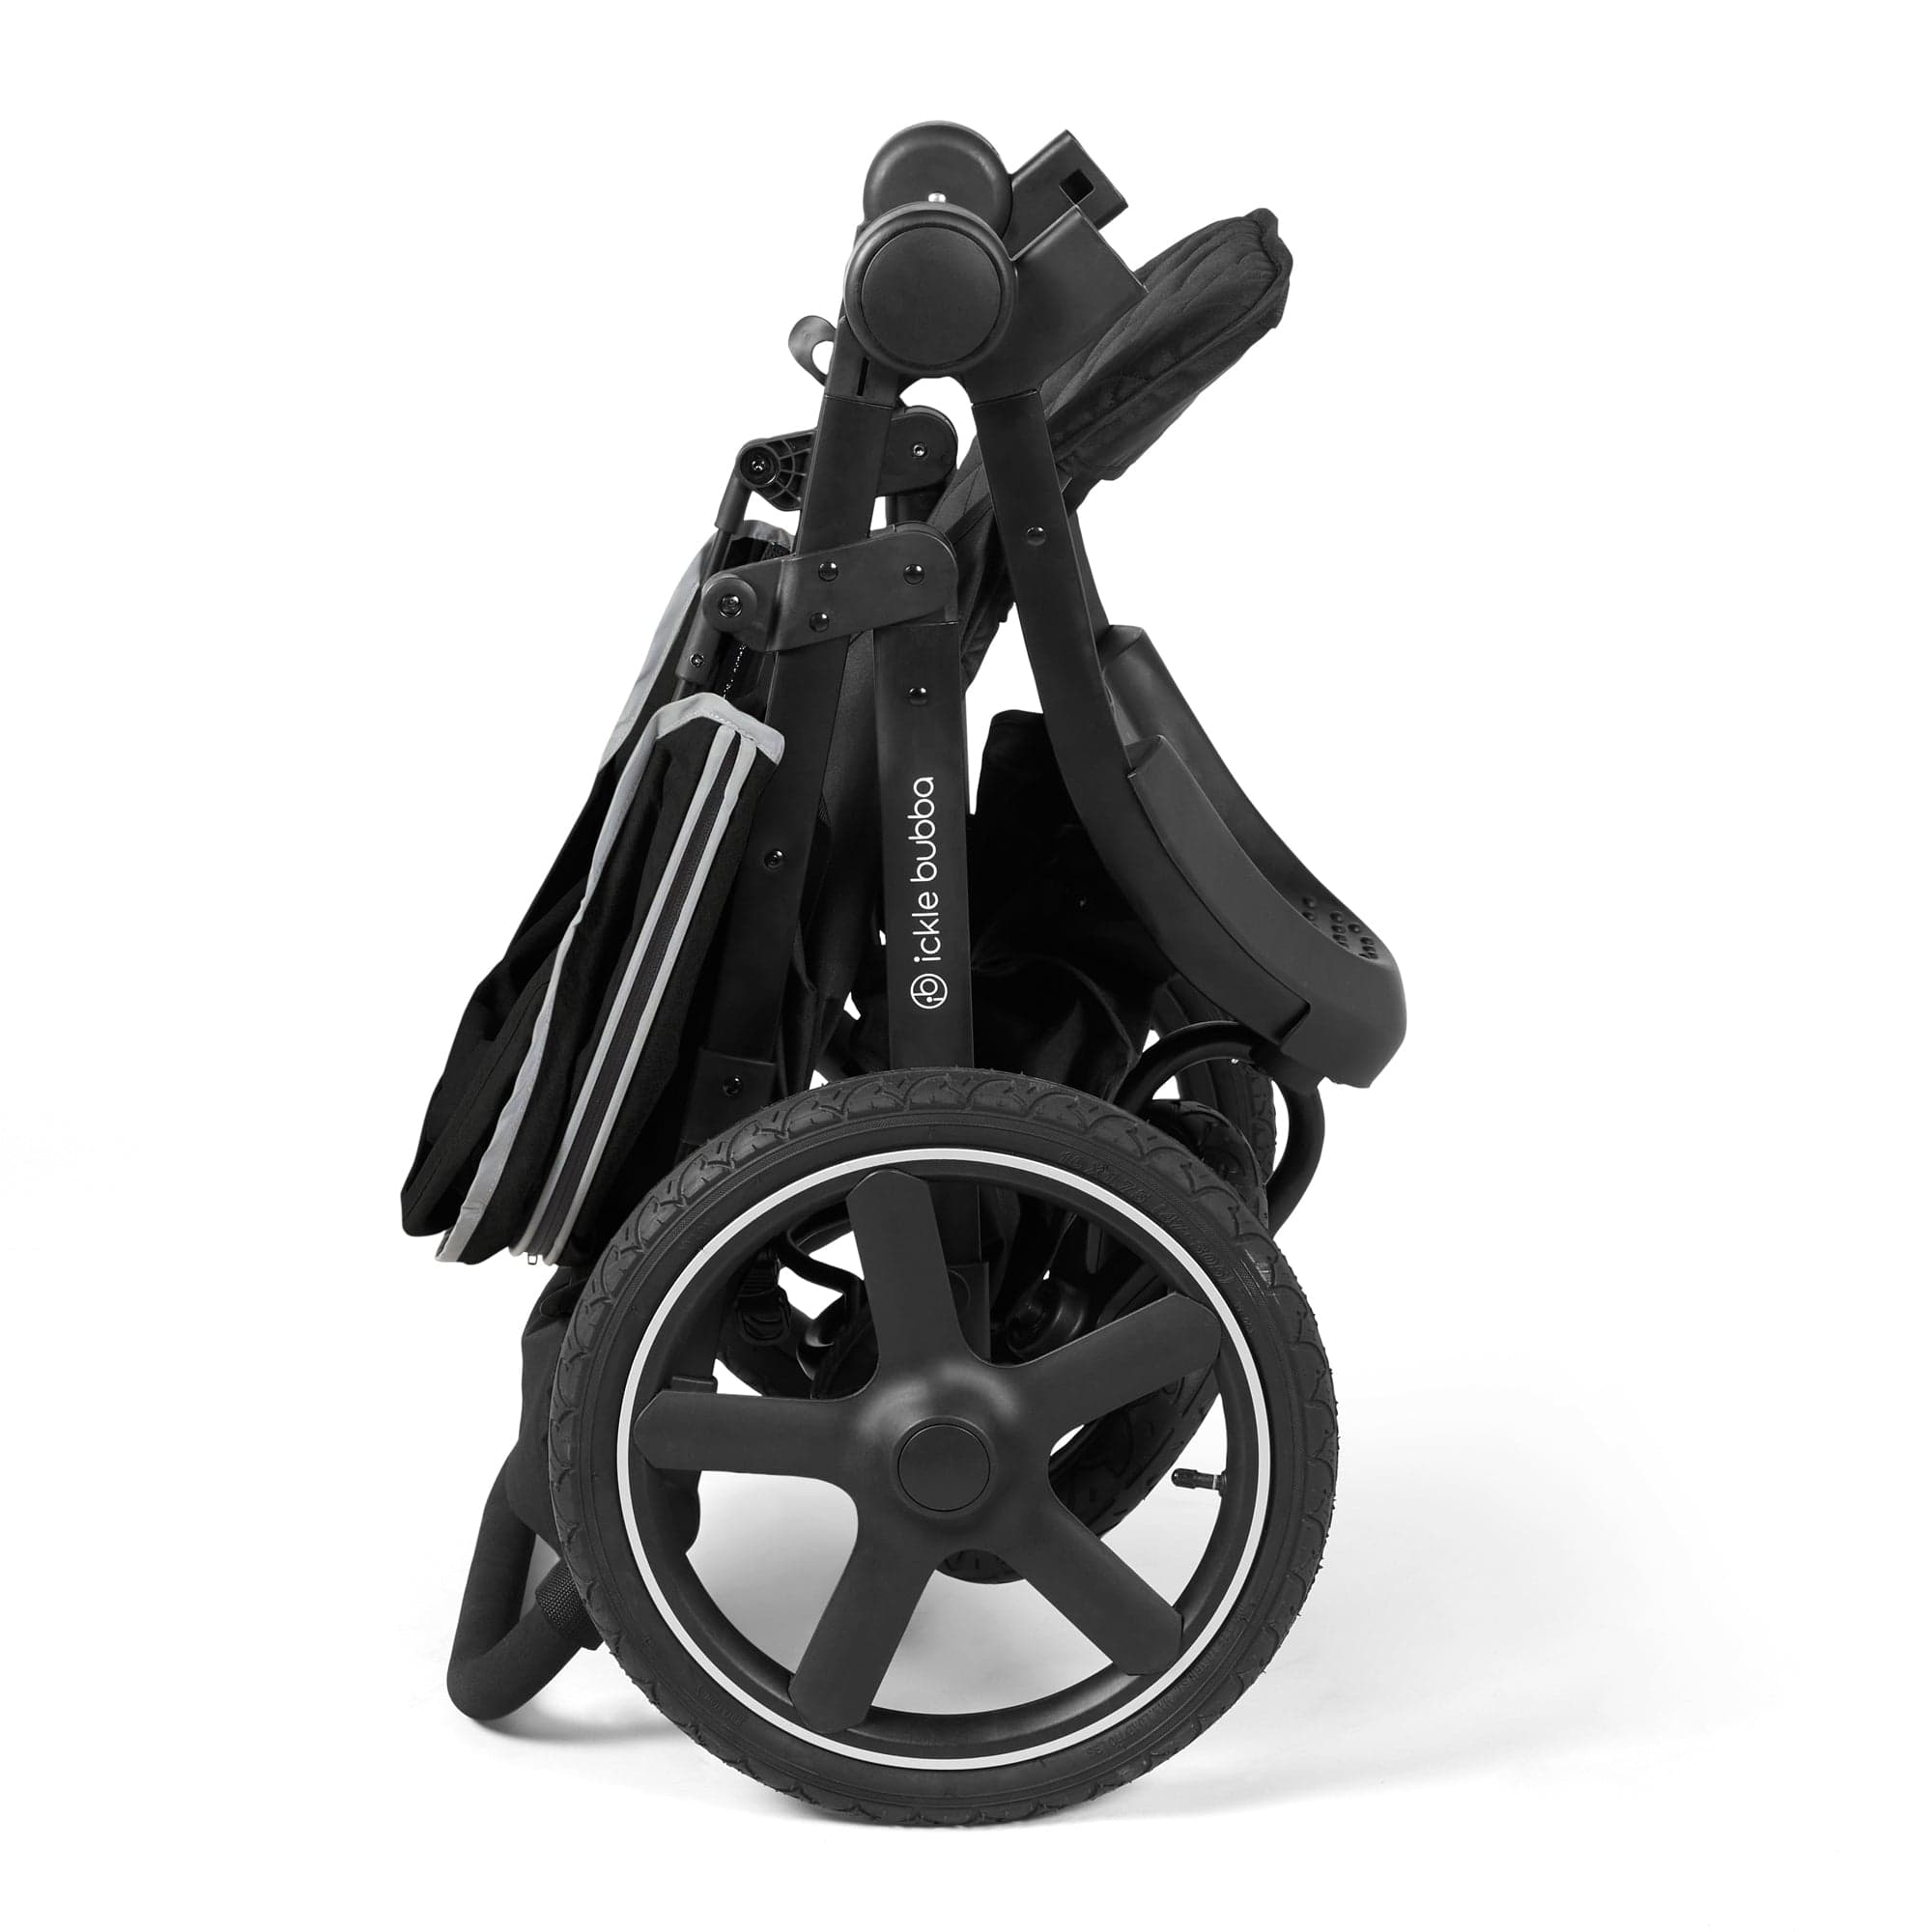 Ickle Bubba Venus Prime Jogger Stroller I-Size Travel System in Black/Black with Base 3 Wheelers